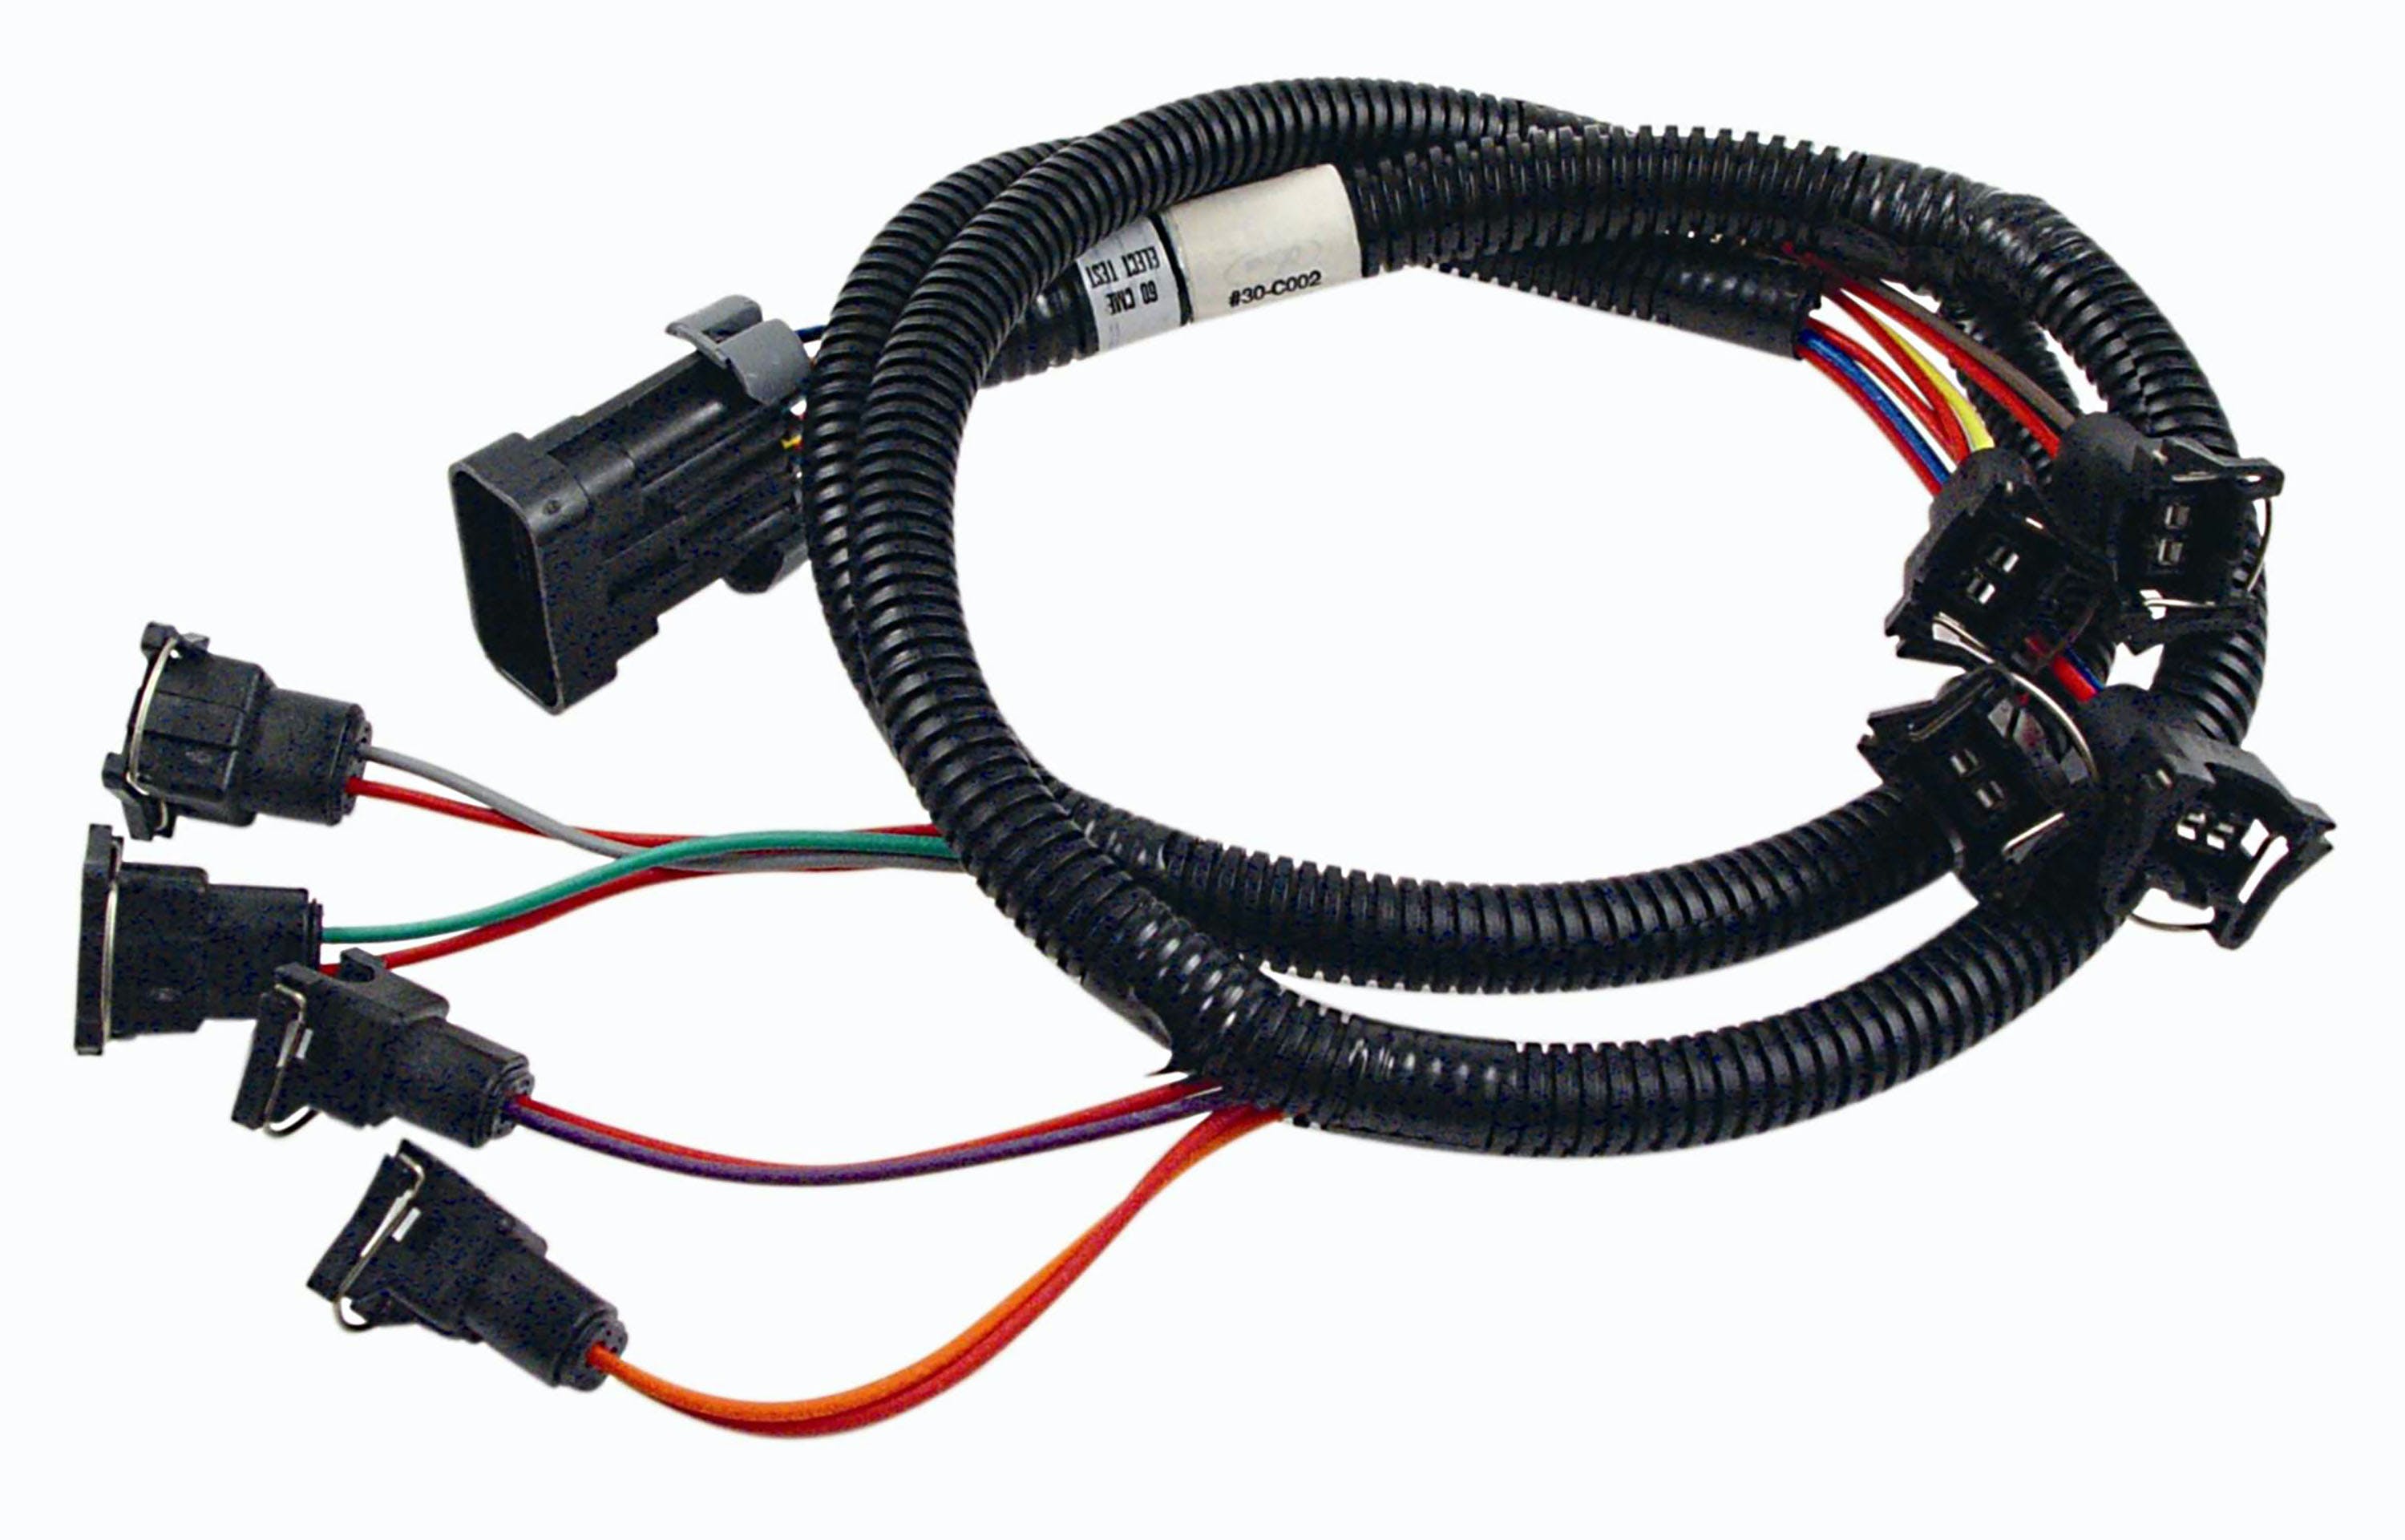 FAST - Fuel Air Spark Technology 307013 Wiring Harness, Fast Fuel Inje Ctor